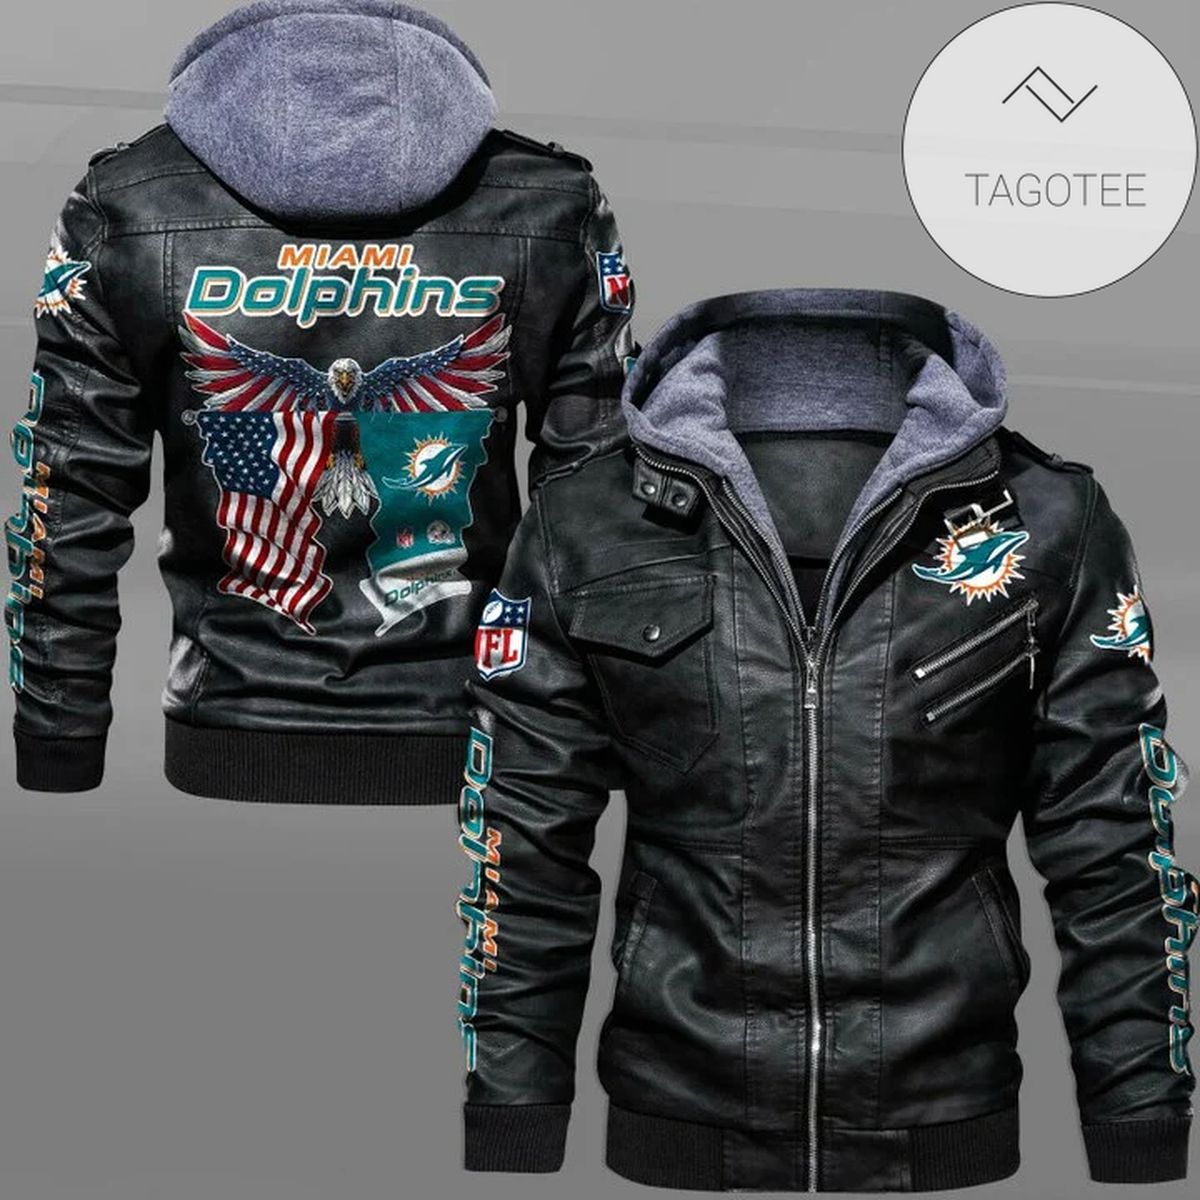 Miami Dolphins NFL Eagle Men's Hooded Leather Jacket